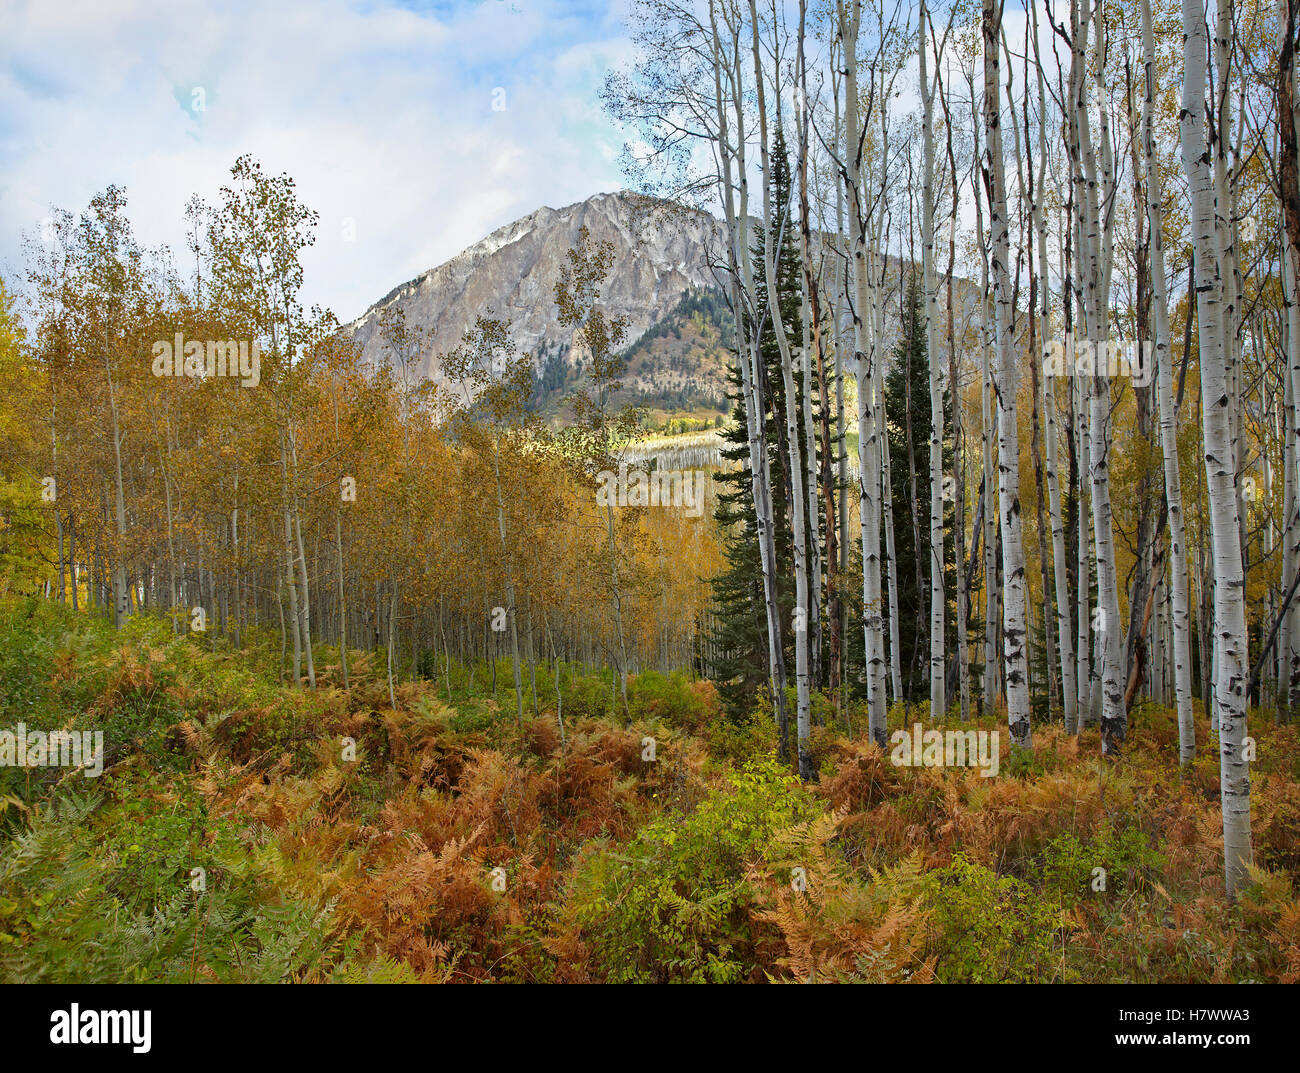 Quaking Aspen (Populus tremuloides) trees and Marcellina Mountain near Crested Butte, Colorado Stock Photo